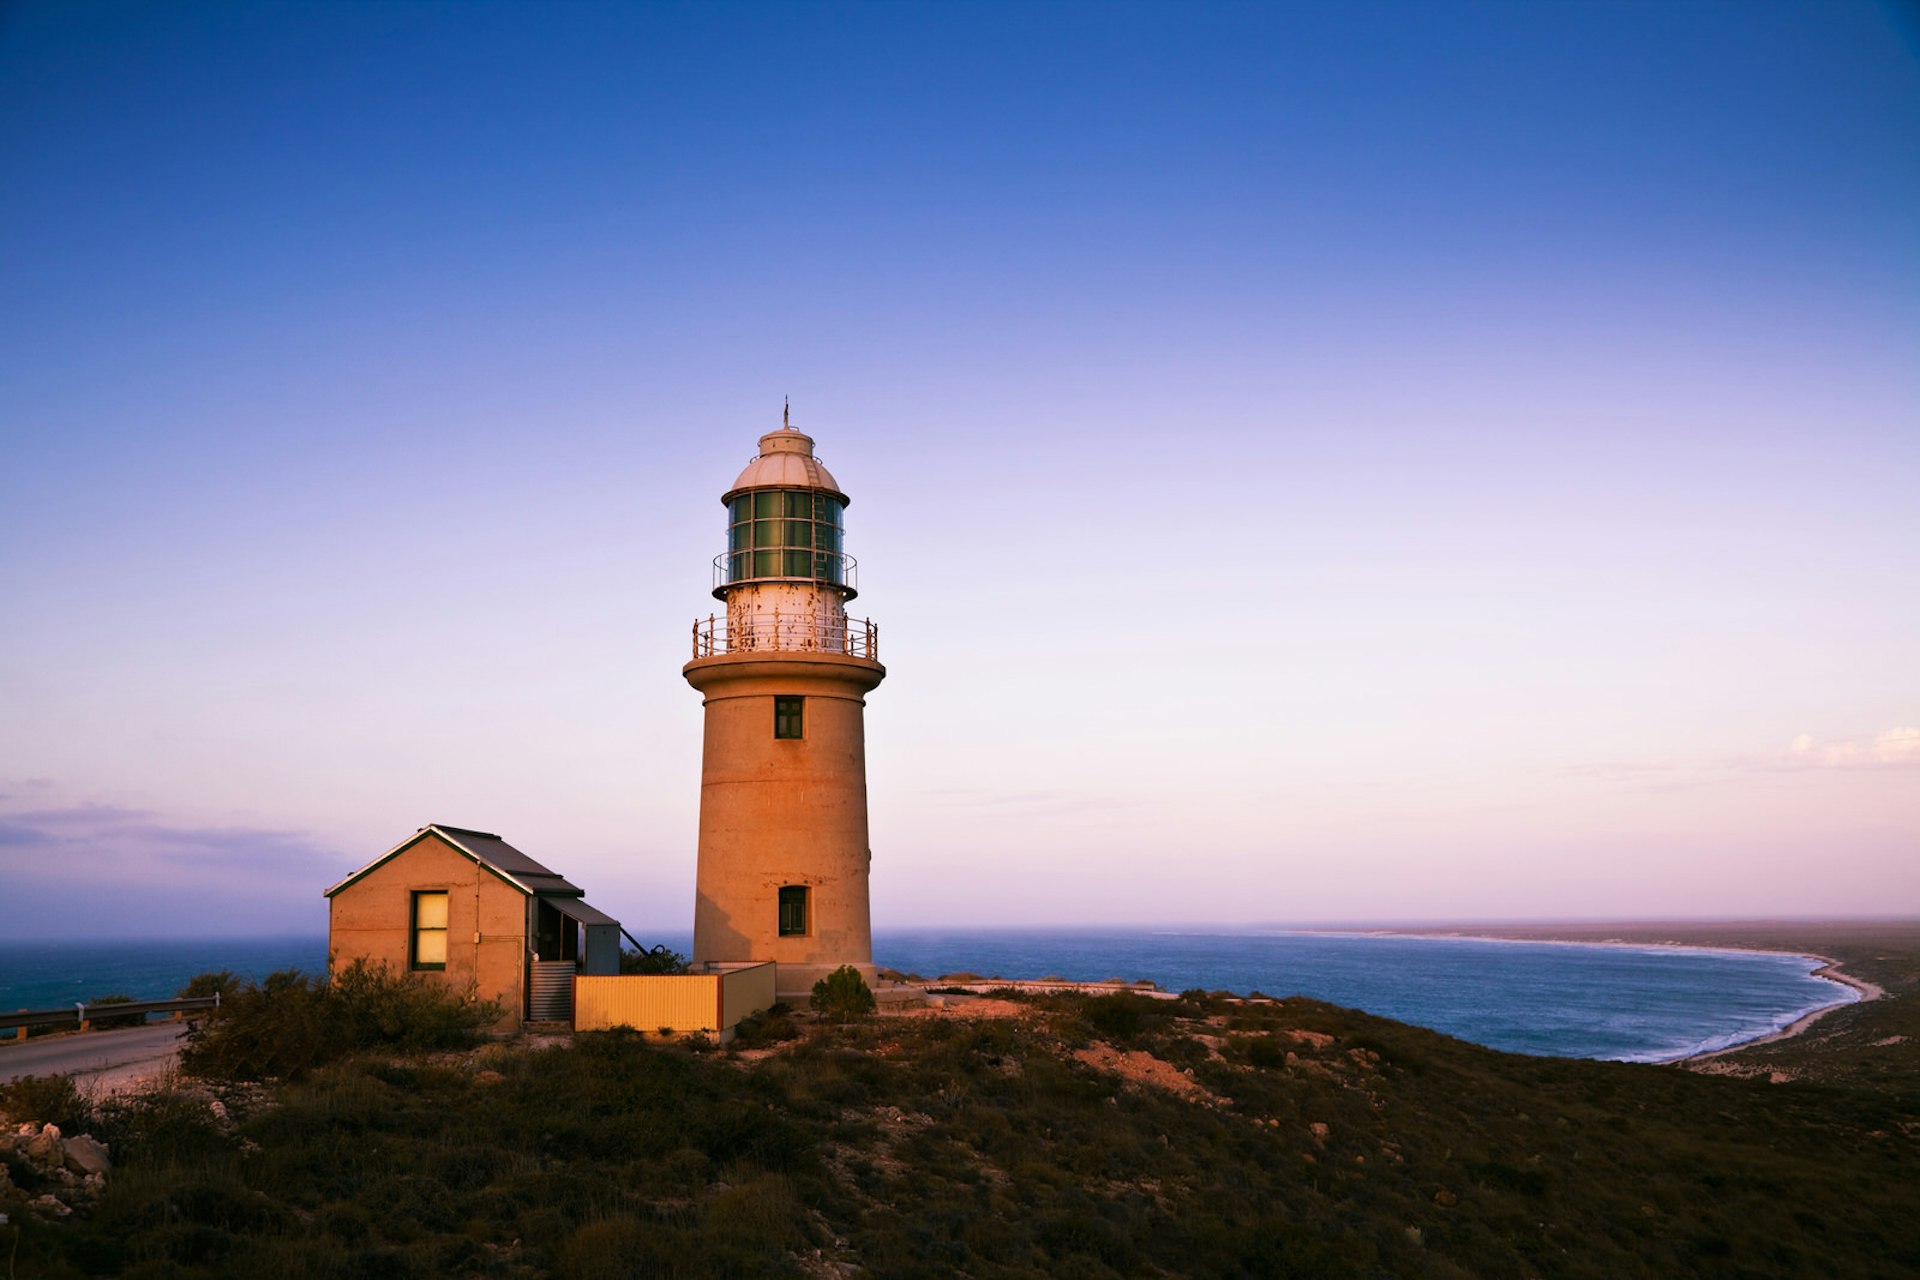 Ningaloo Lighthouse pictured during twilight; it sits atop a brush-covered hill, with the beach-lined coast curving away into the distance below